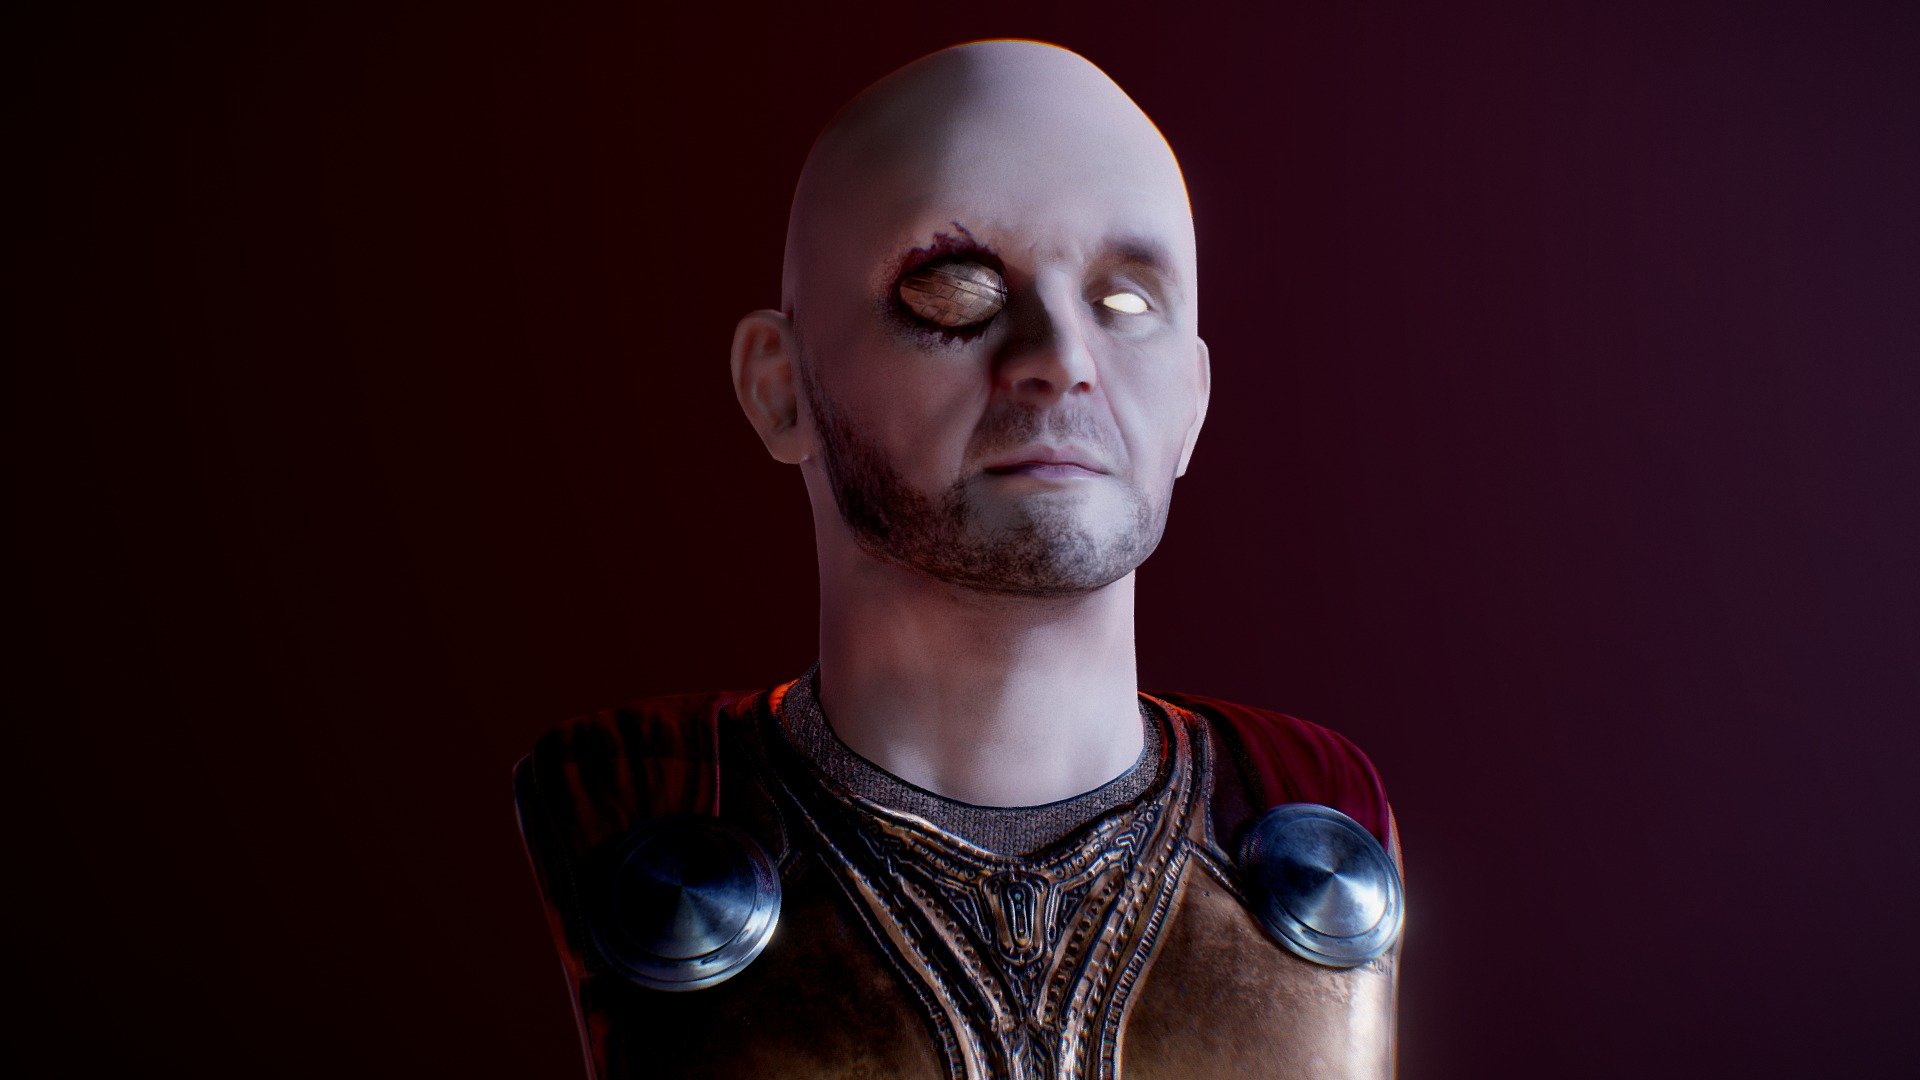 Here is a model i made of a hypothetical 70's-80's marvel movie about a young Anthony Hopkins playing a young Odin.
I know it isn't 100 percent lore friendly, but i just thought it looked cool!
And yes he is bald because hair is hard and looked goofy 3d model